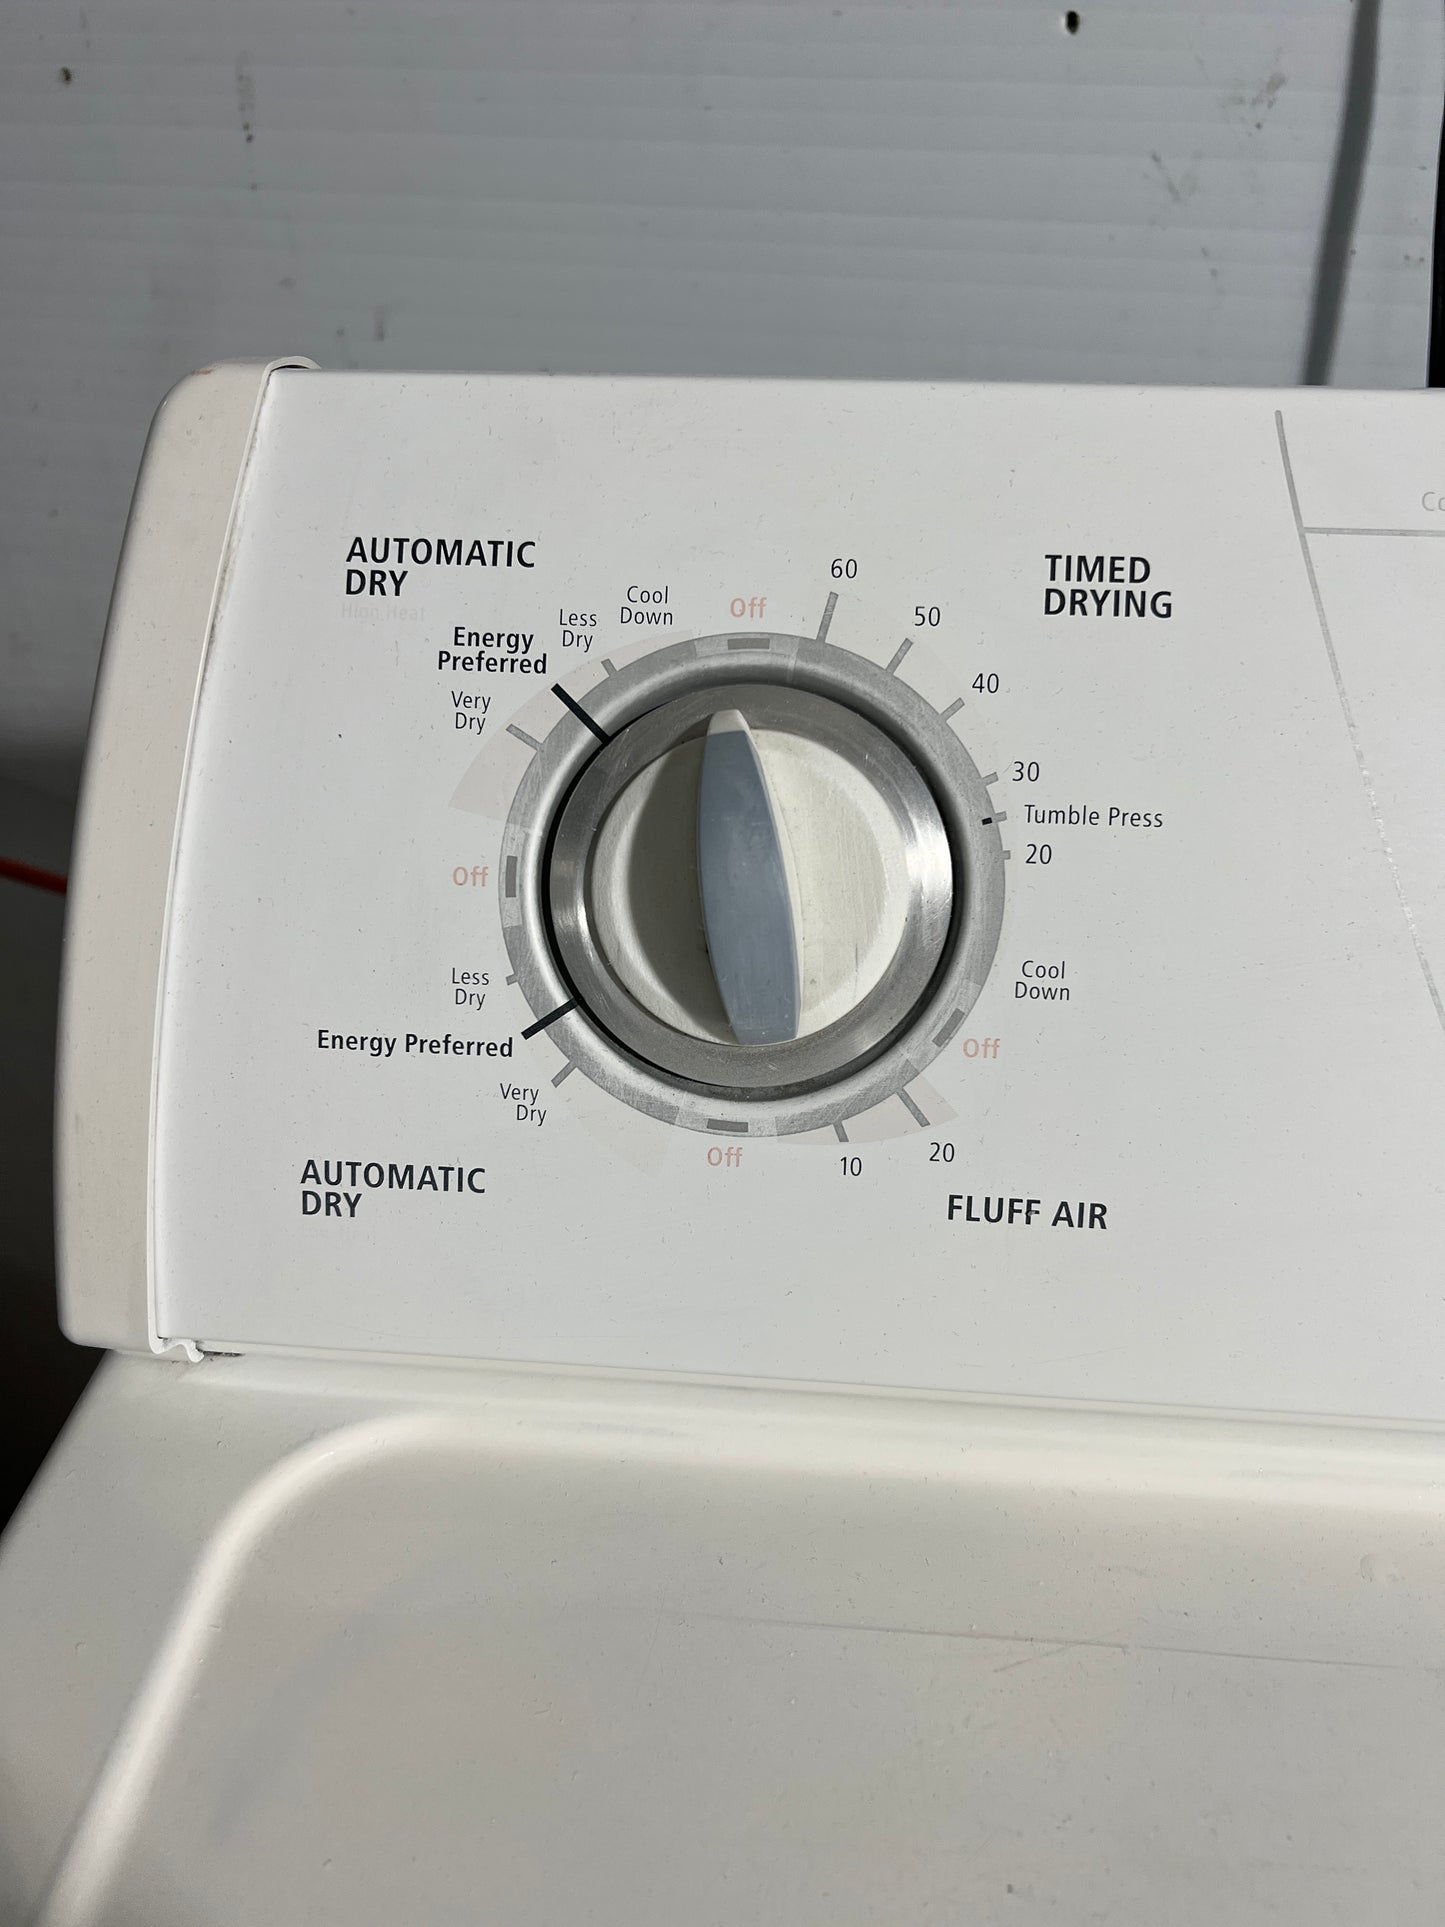 Whirlpool Front Load Gas Dryer in White 888937